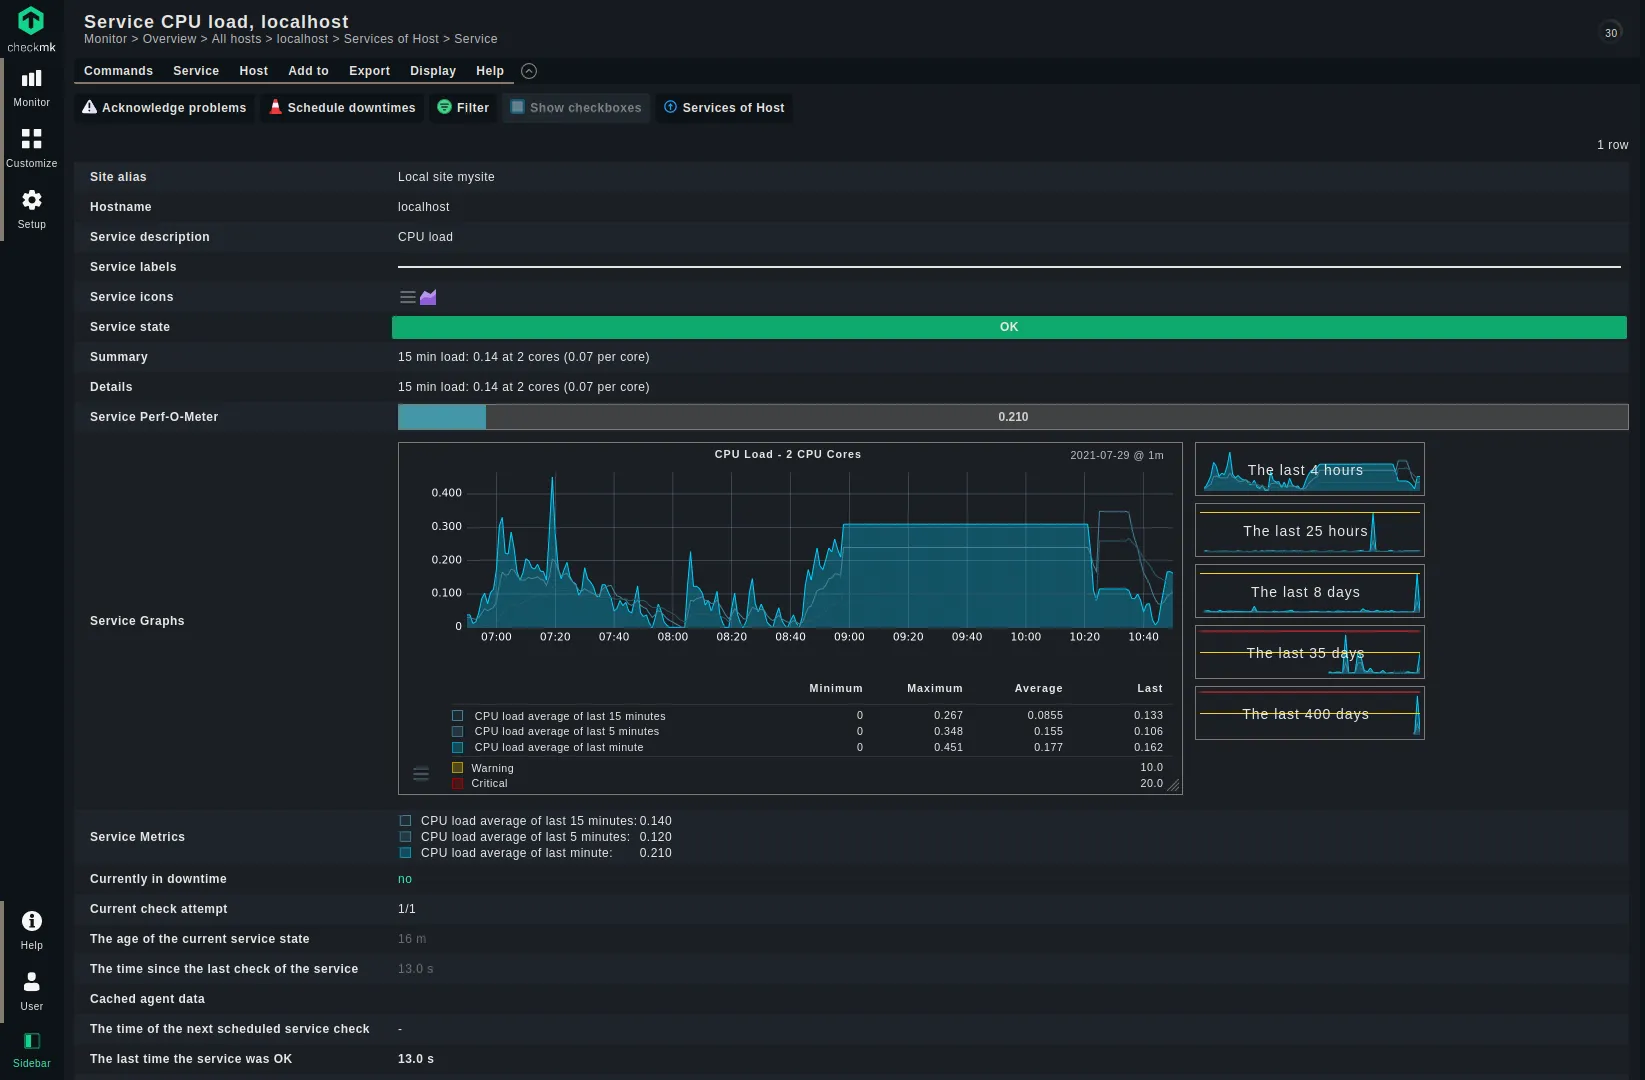 CPU load specific detailed metric on Checkmk allows monitoring CPU status based on a variety of time parameters.